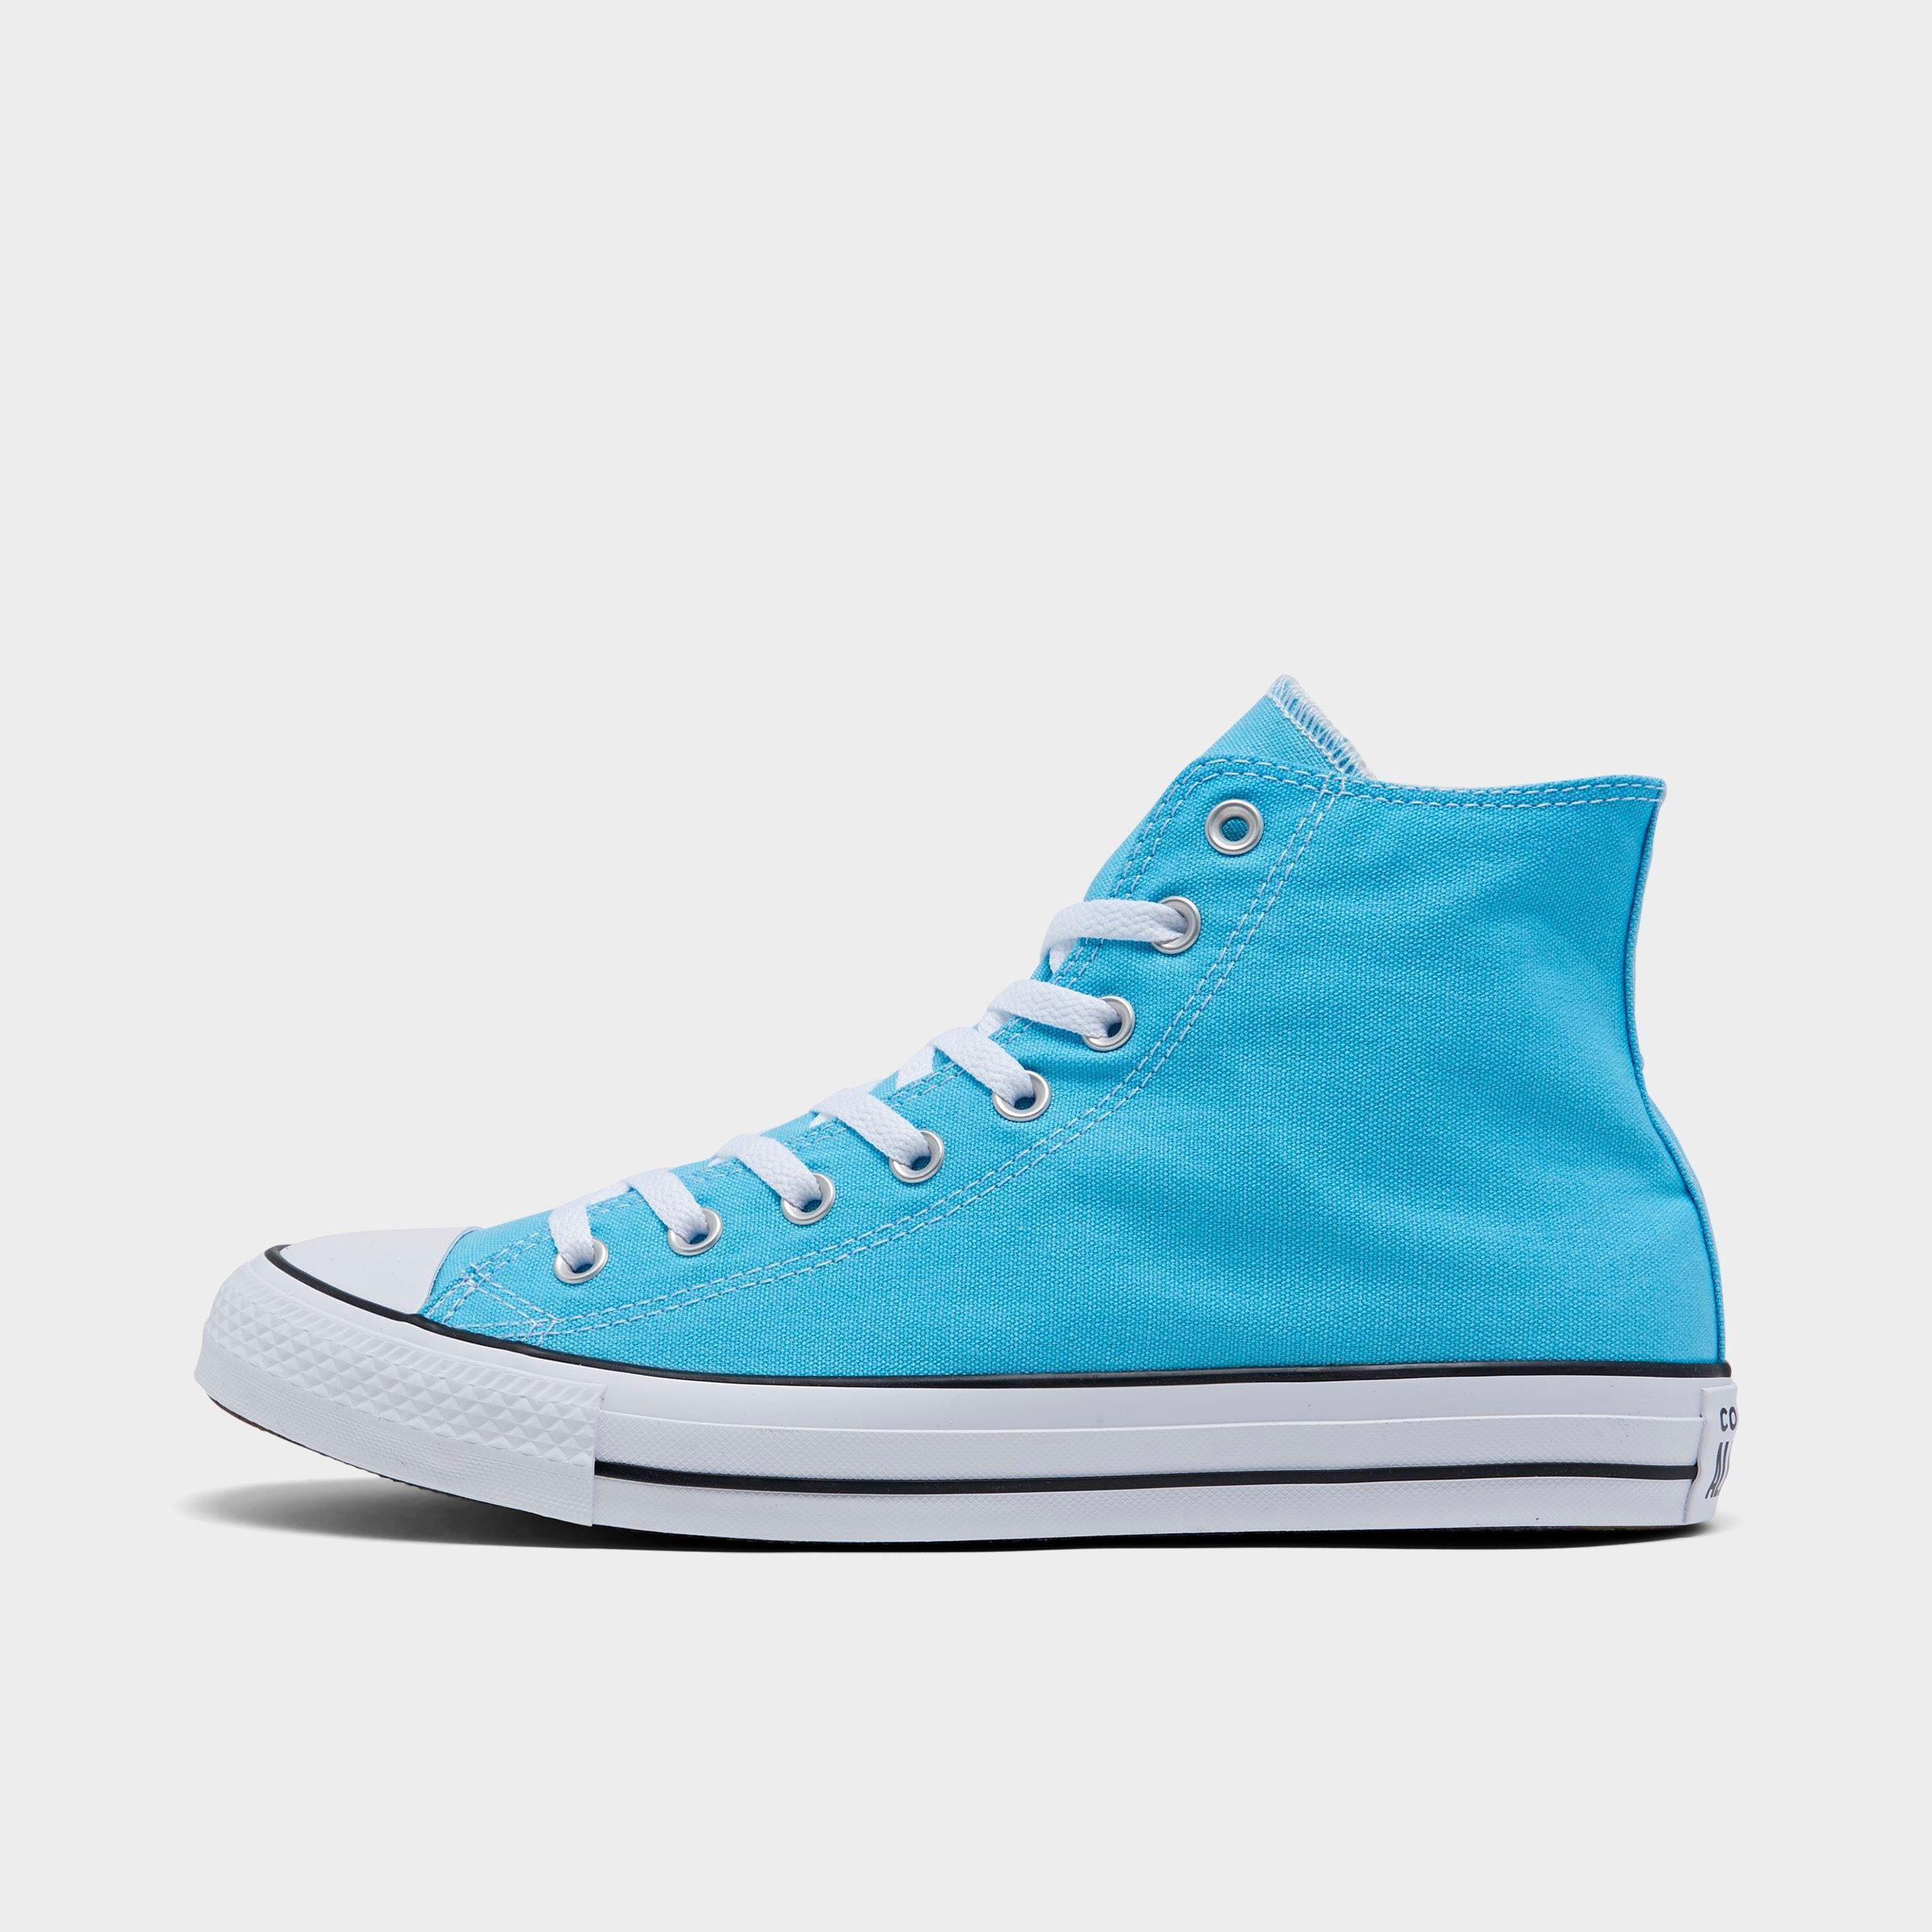 CONVERSE CONVERSE CHUCK TAYLOR ALL STAR HIGH TOP CASUAL SHOES,3002300